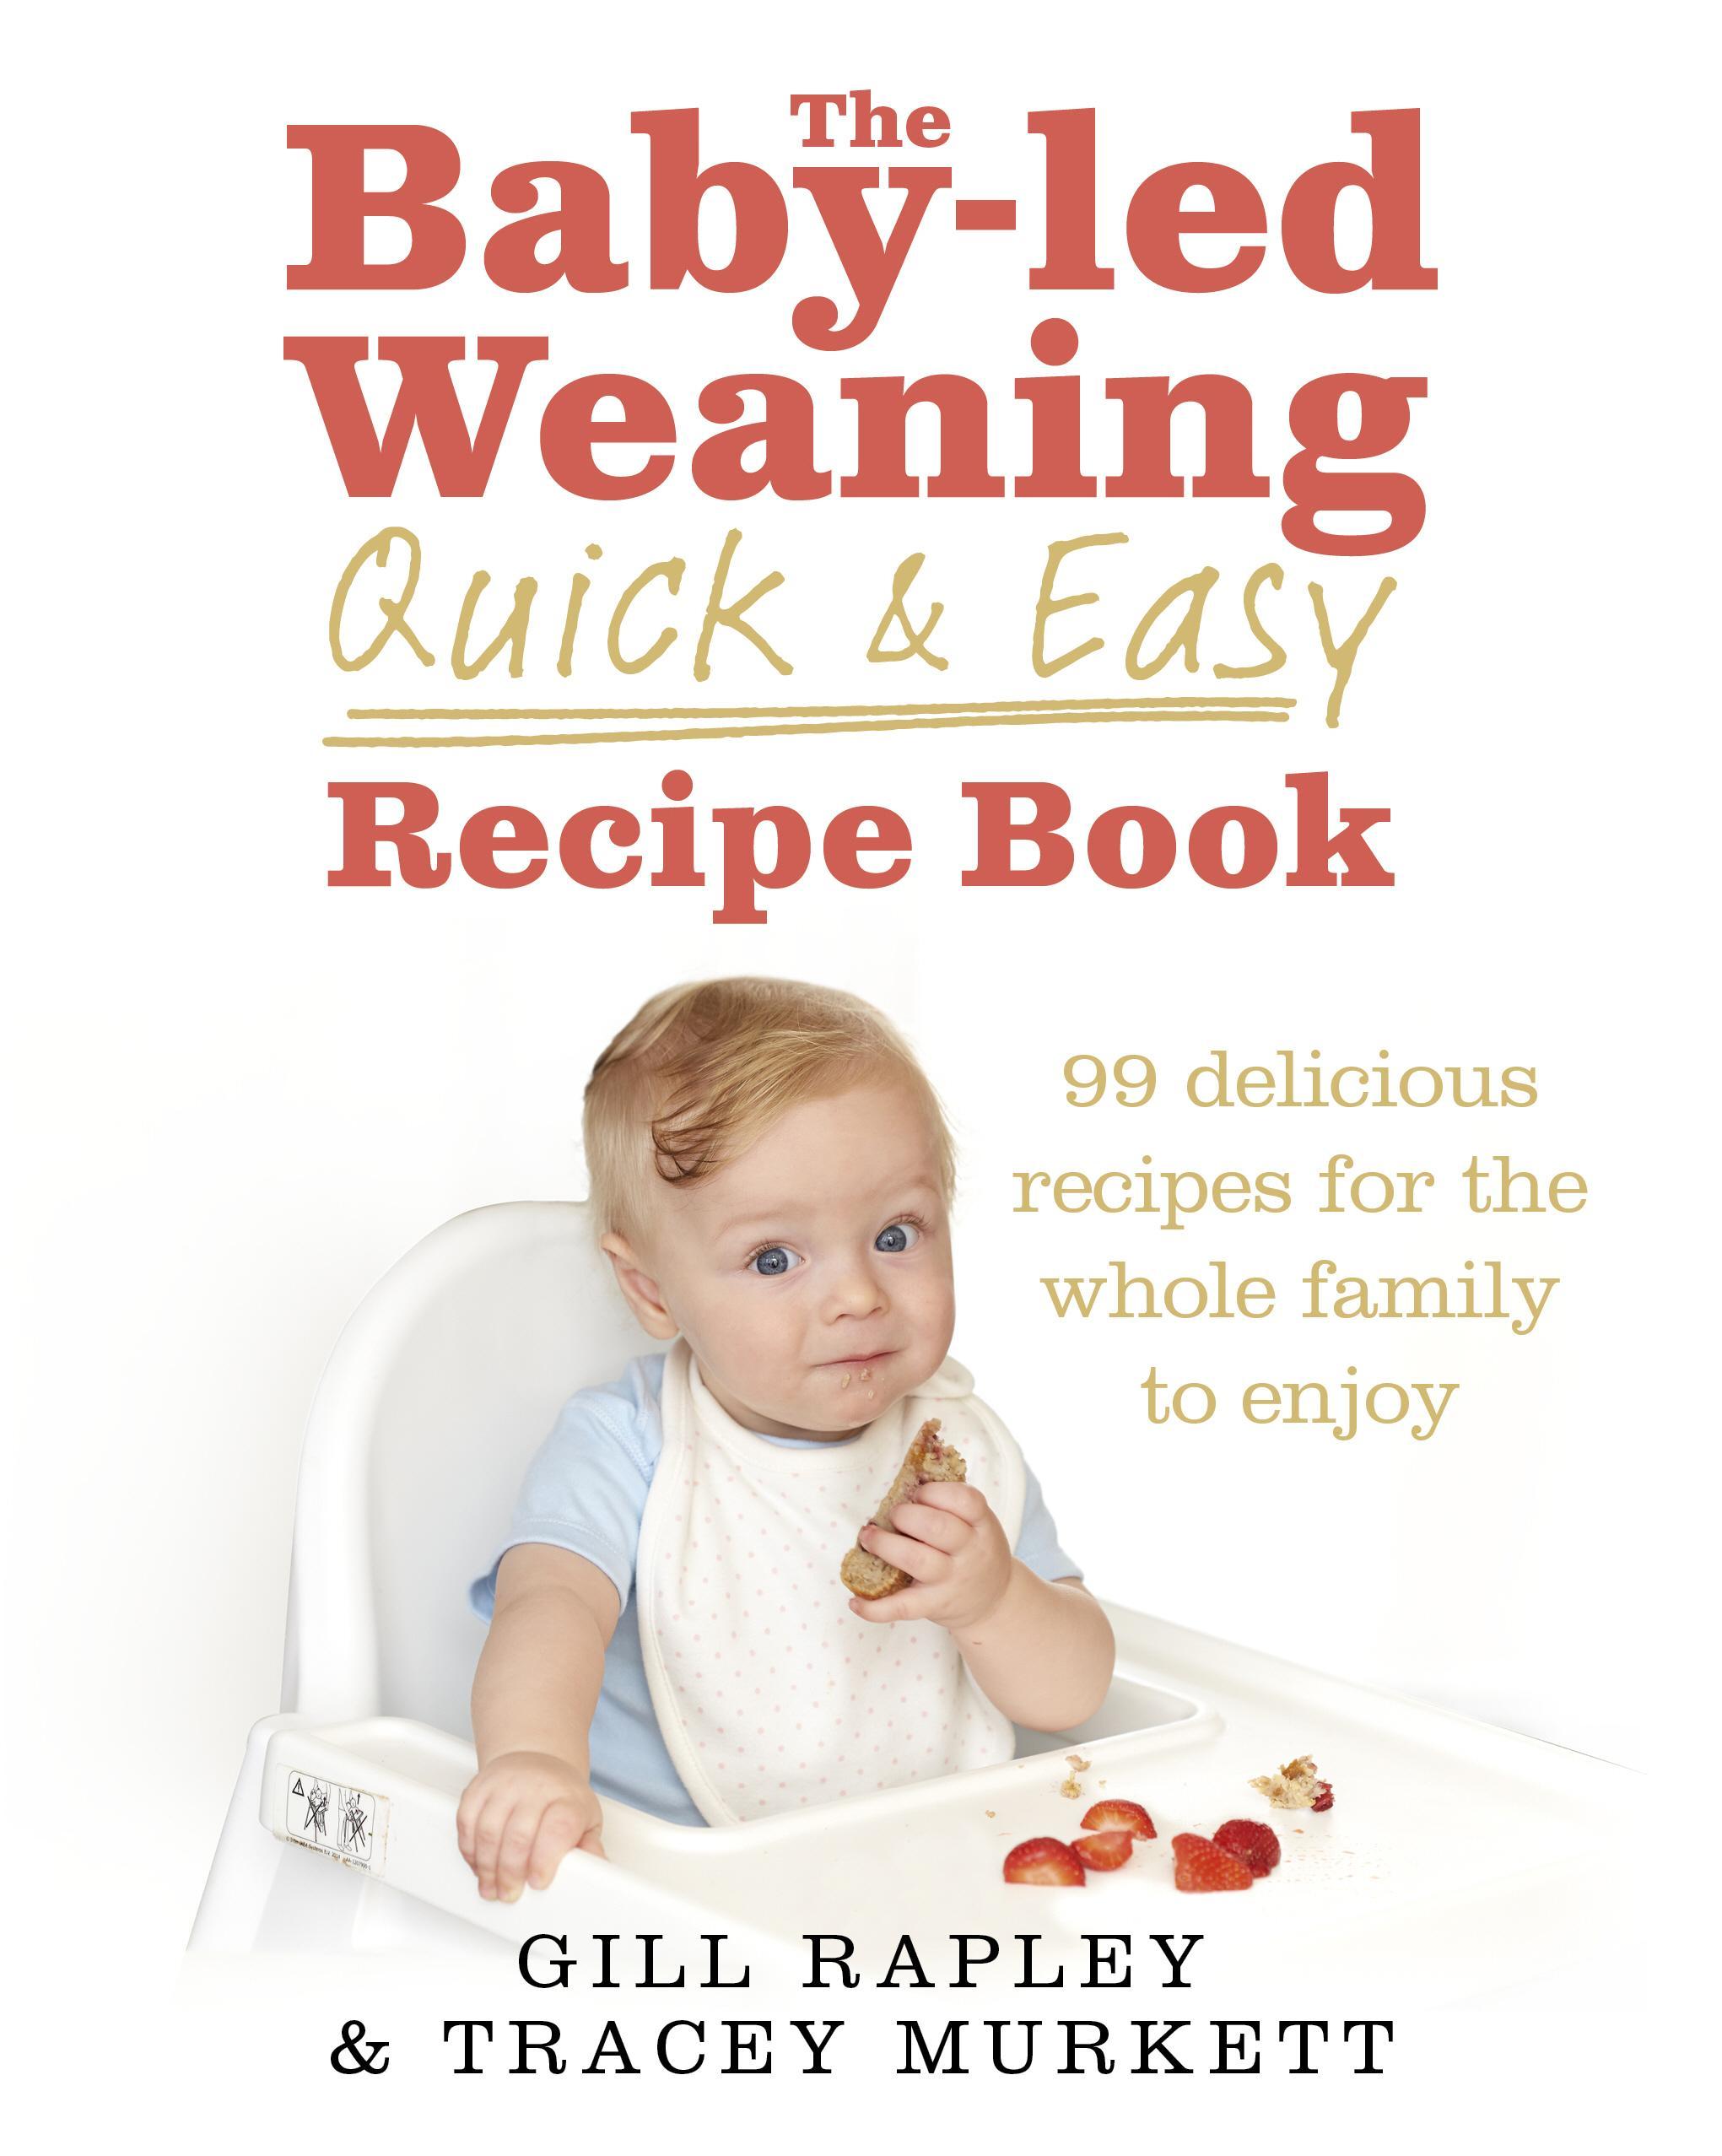 Baby-led Weaning Quick and Easy Recipe Book - Gill Rapley